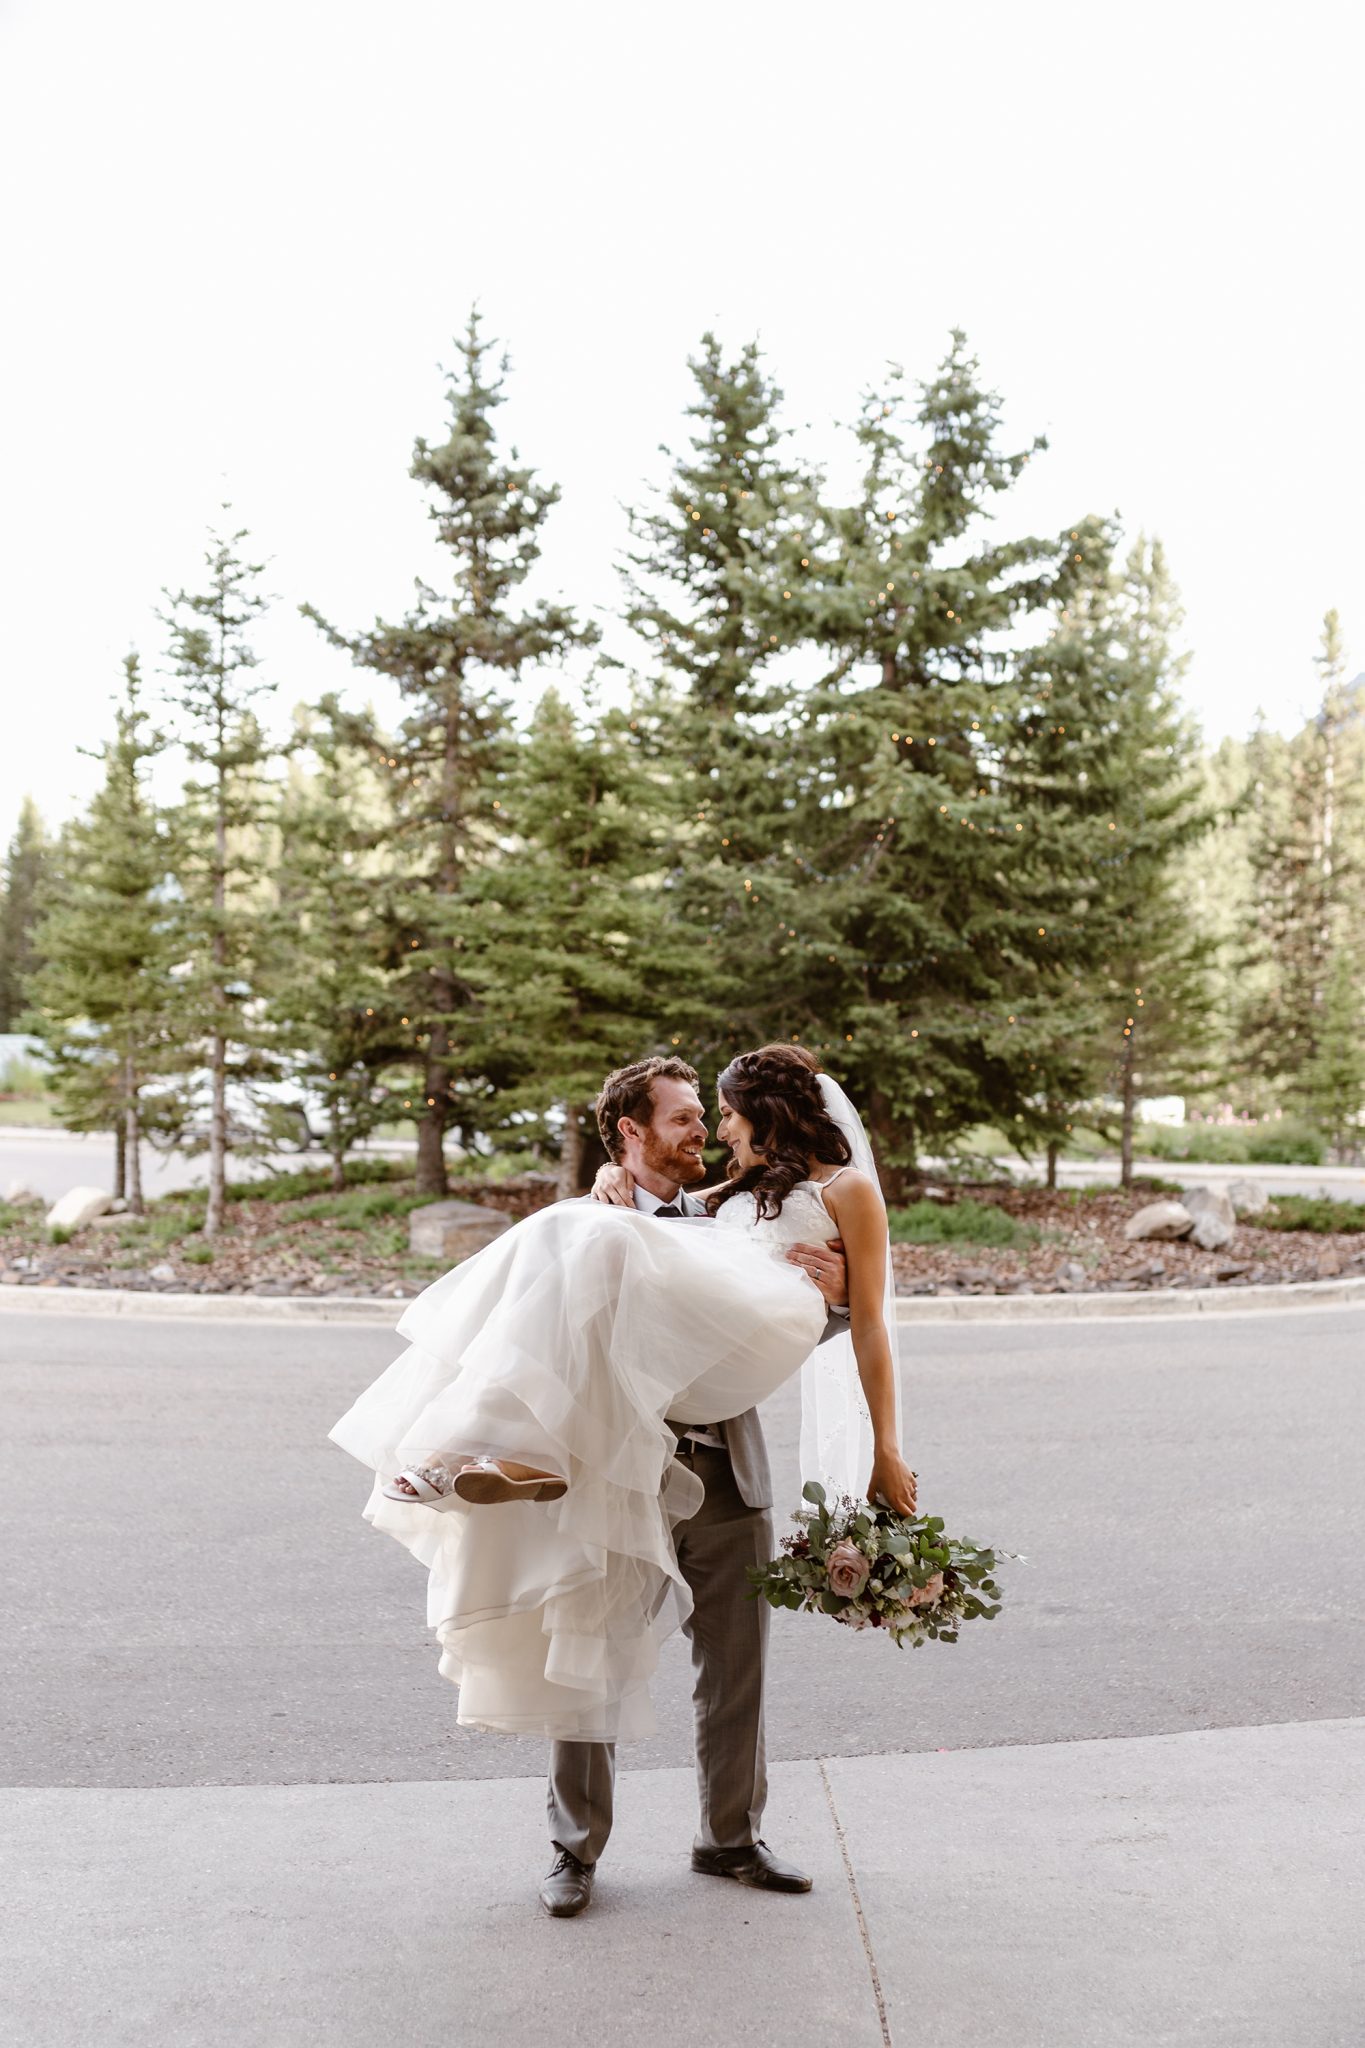 Downsized Covid 19 wedding at Chateau Lake Louise - bride and groom, wedding bouquet 